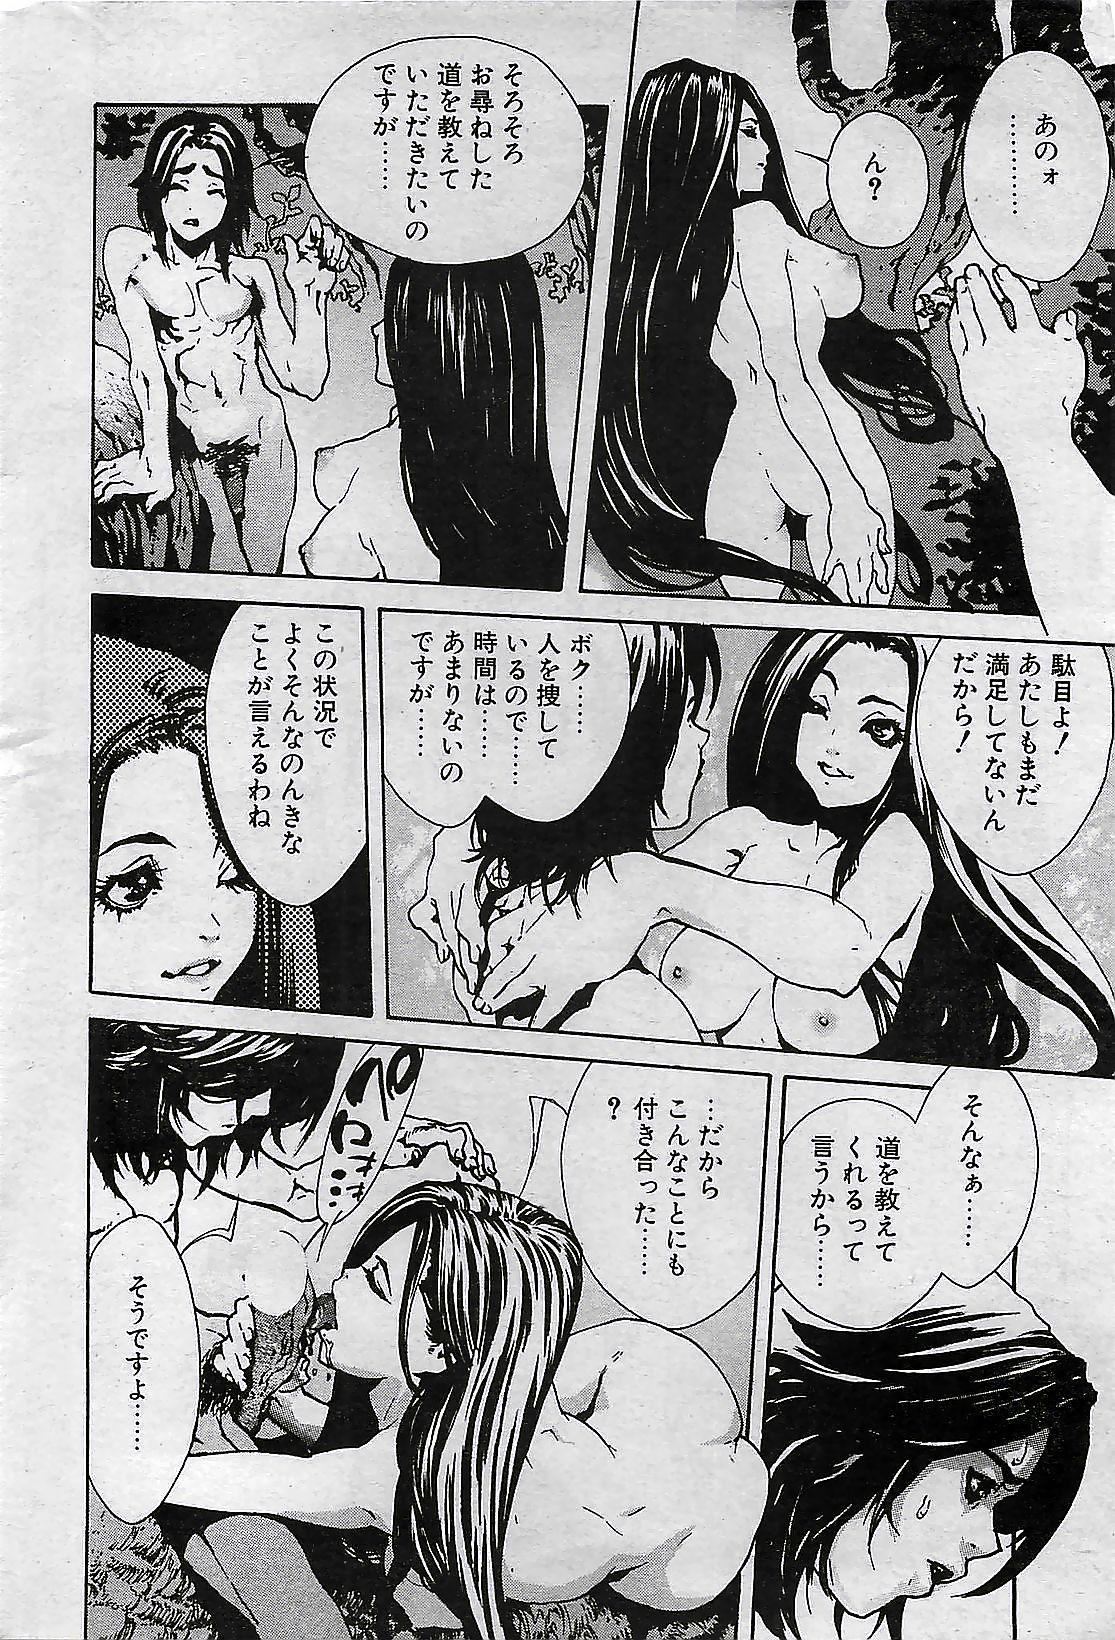 Stepdaughter COMIC Penguin Club 2001-04 Vol. 176 Dominant - Page 8